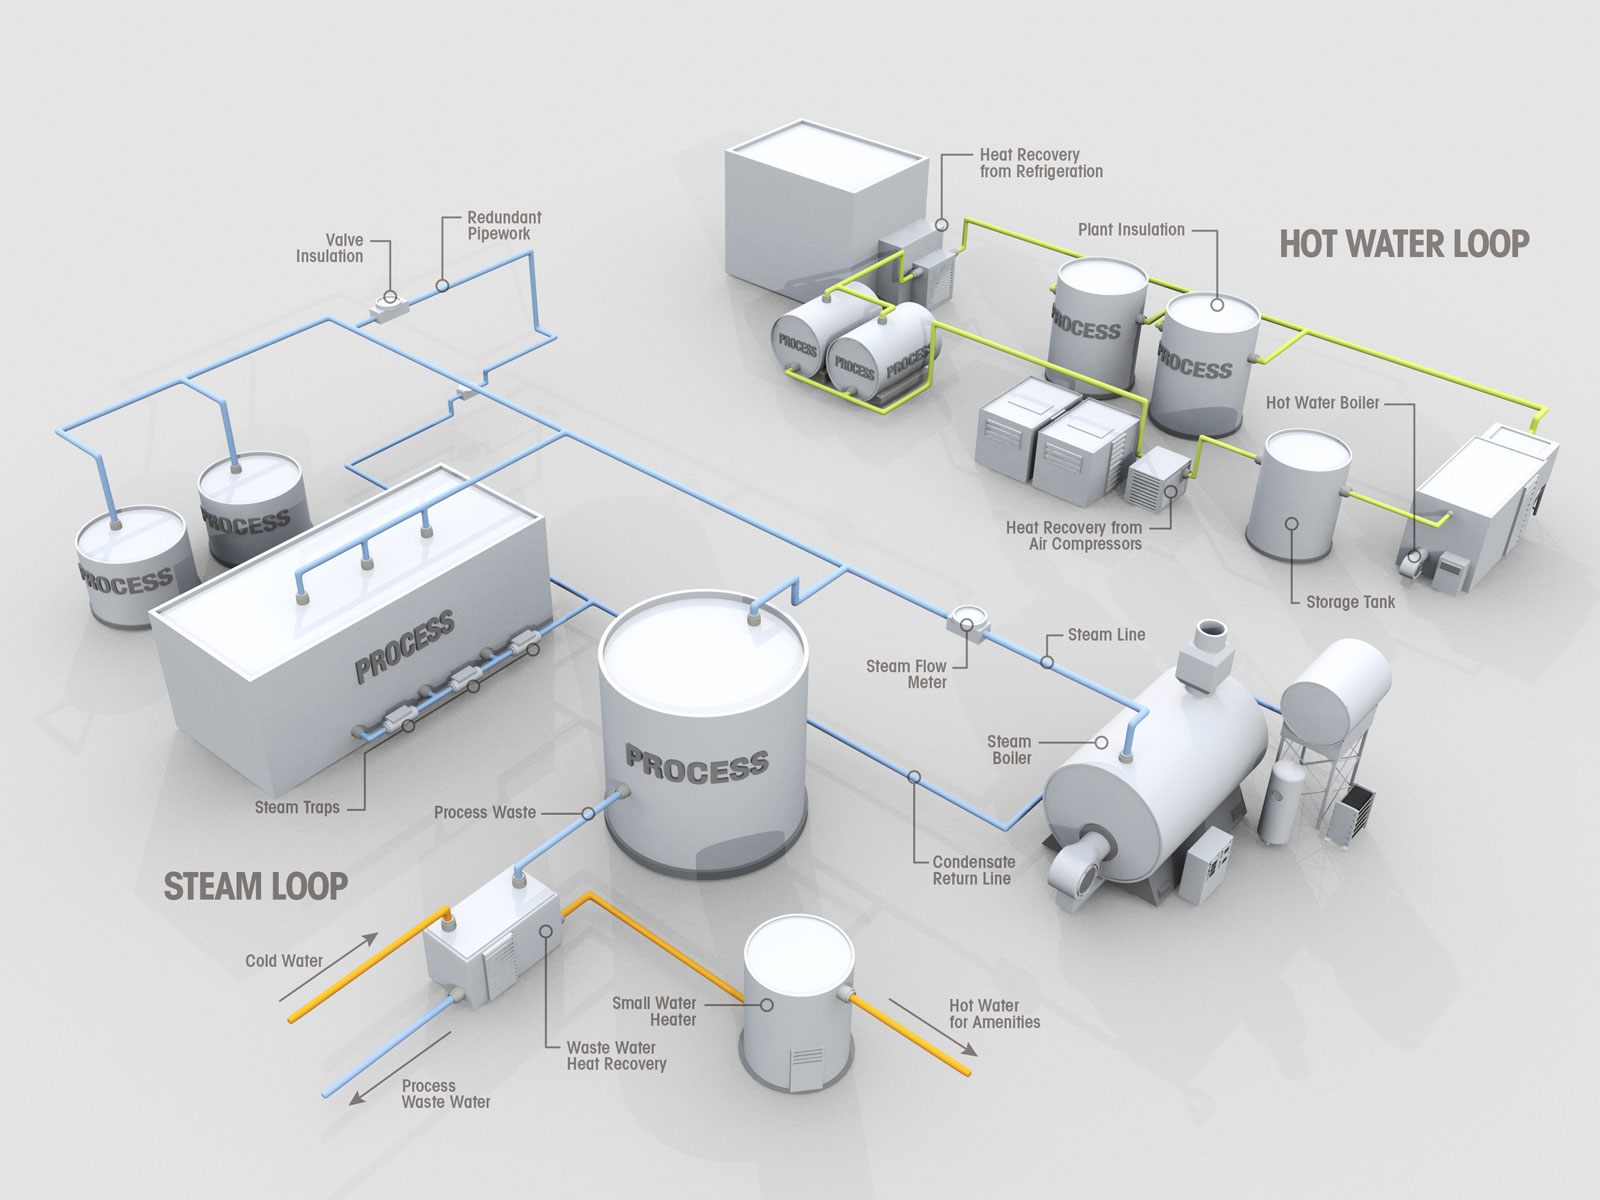 3D technical process model of Steam Loop and Hot water Loop overview with text overlay